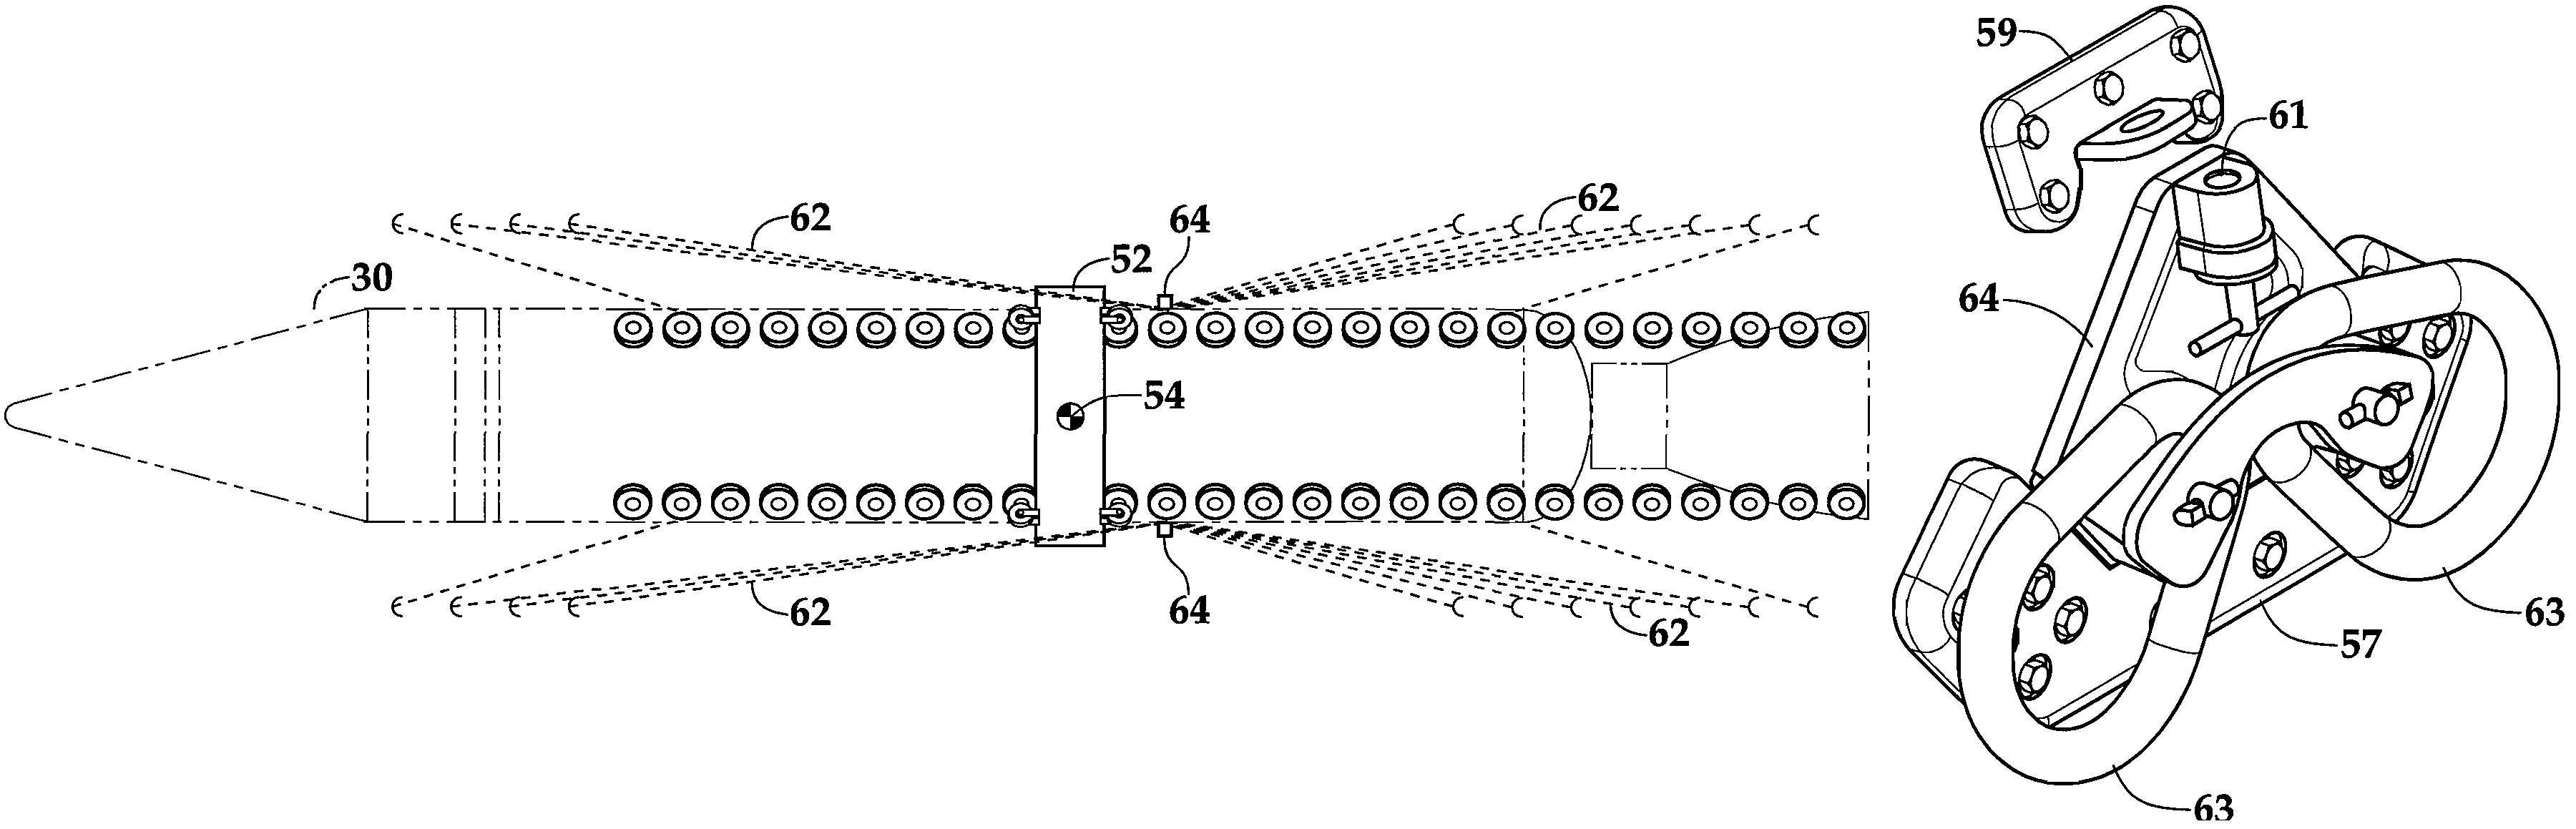 Release mechanism for a forward and aft restrained load in an aircraft